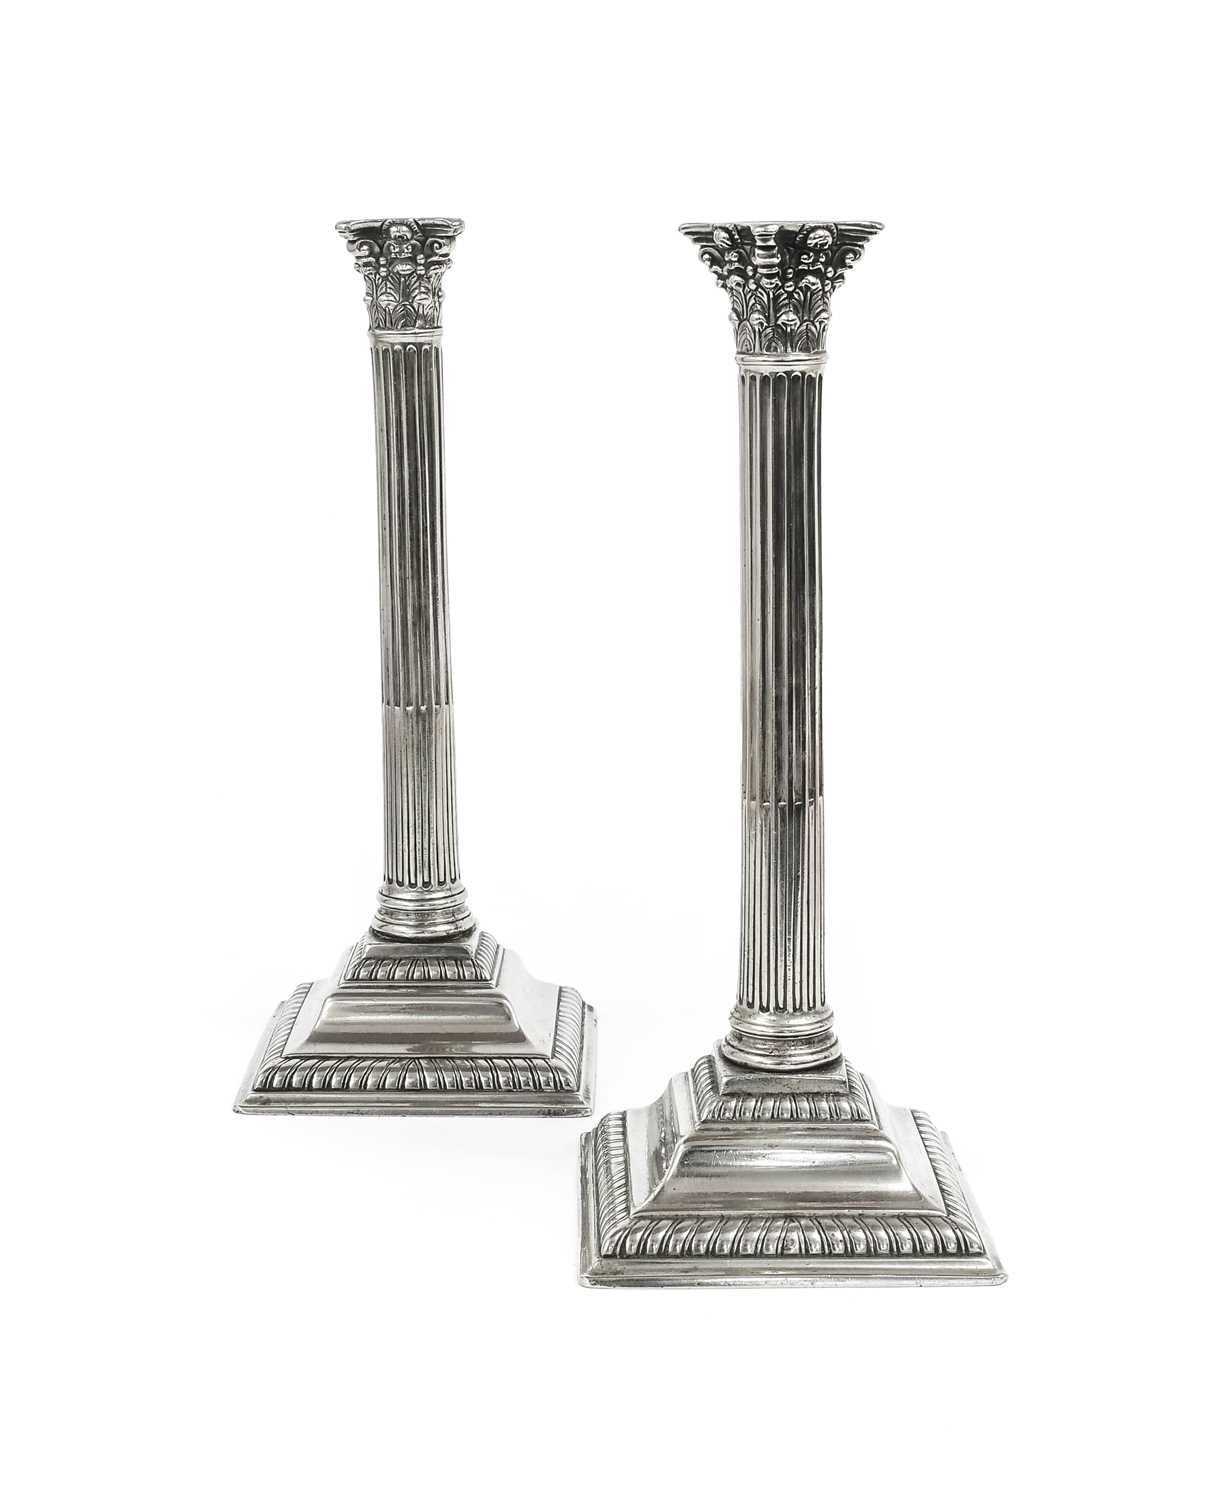 A Pair of George III Paktong Corinthian Column Candlesticks, with leaf-sheathed capitals, stop-